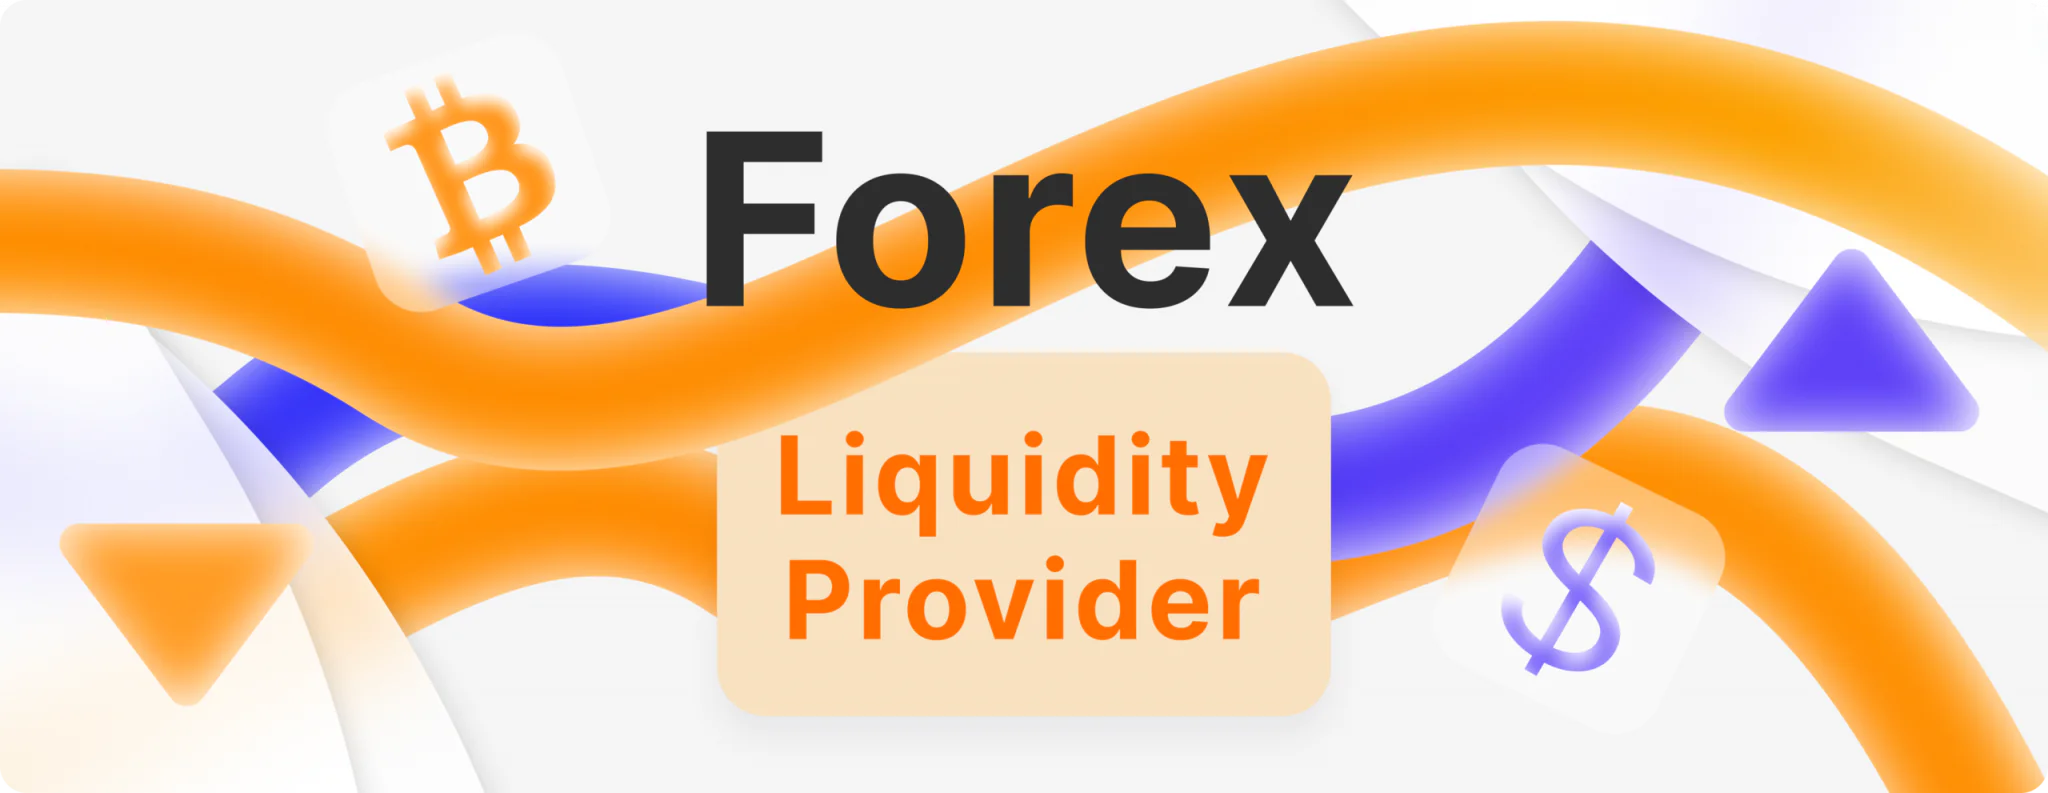 Who Are Forex Liquidity Providers, And How Do They Work